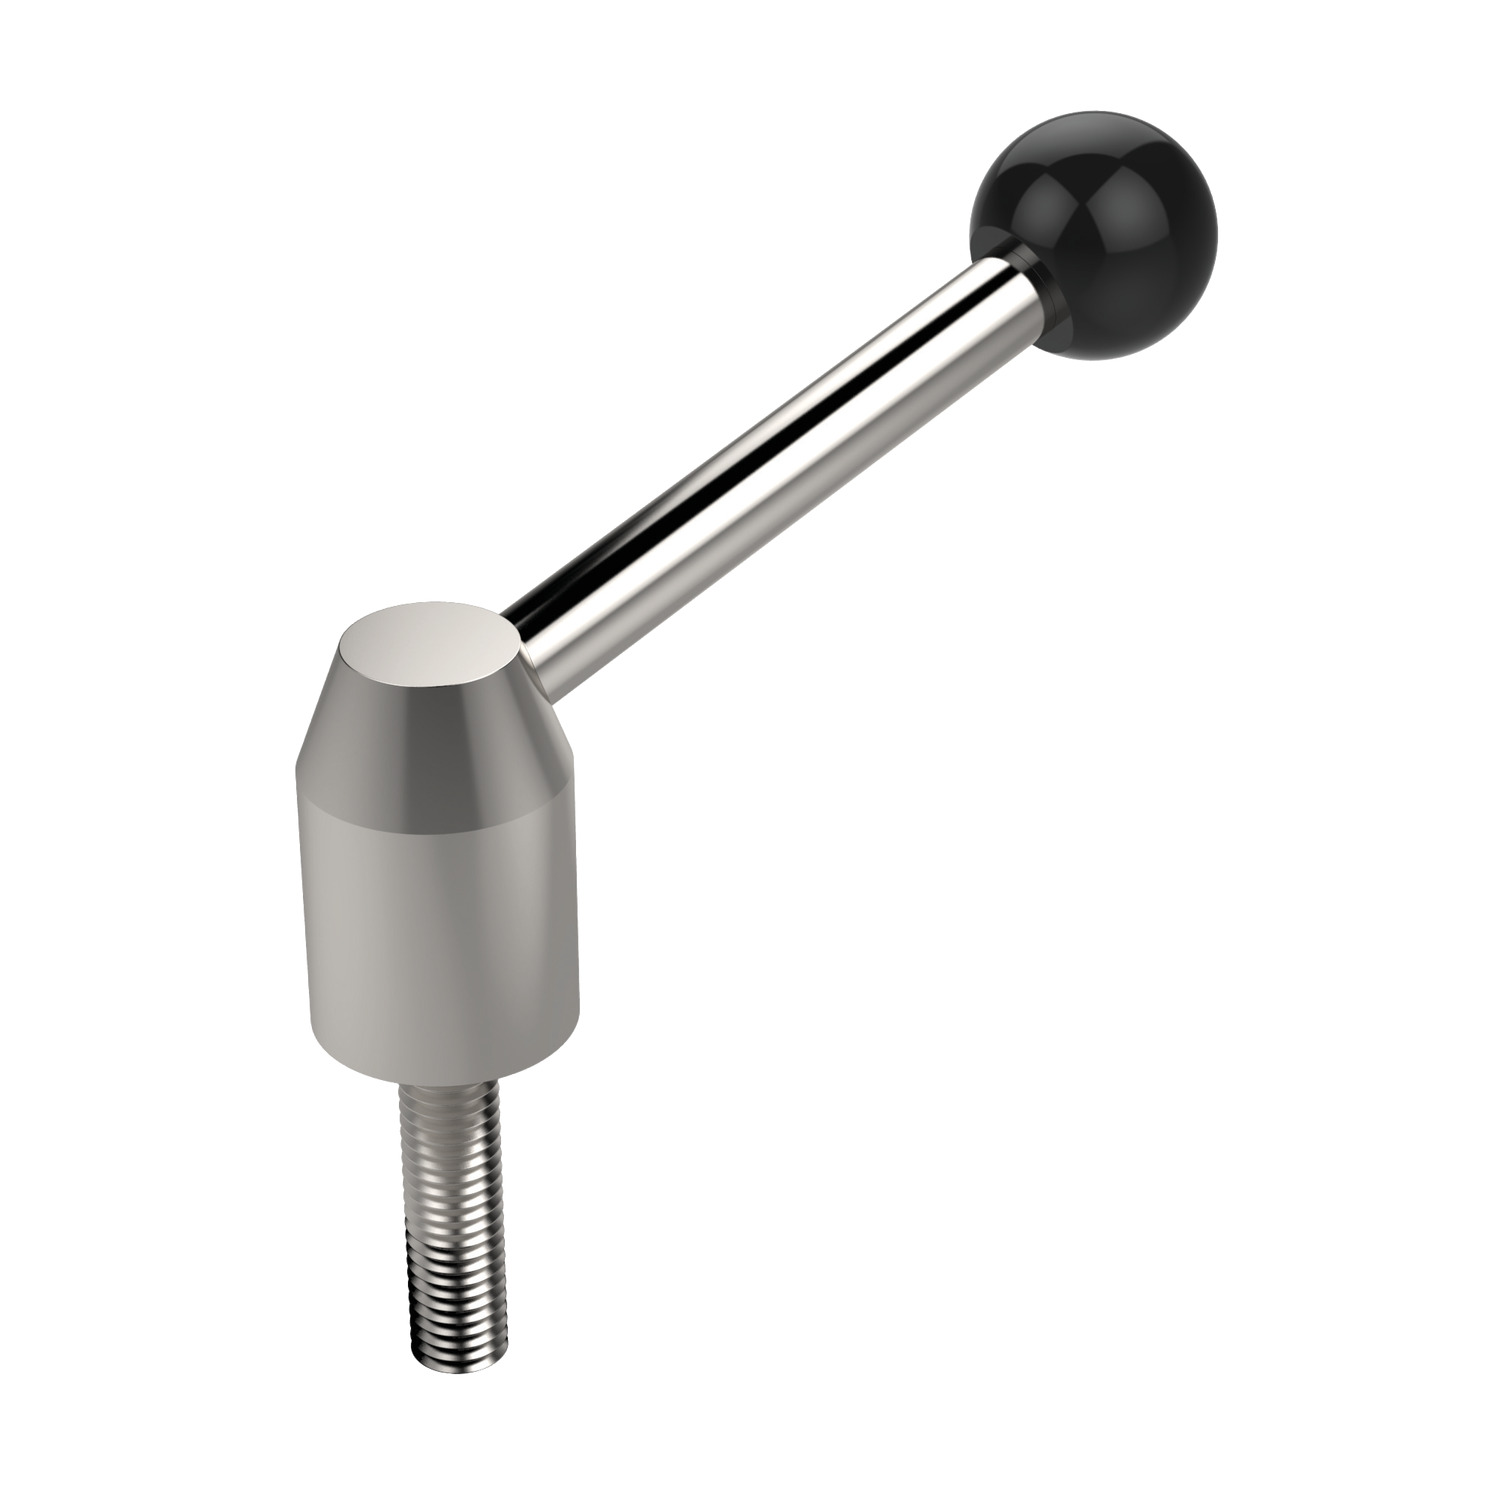 Product 74530, Adjustable Clamping Lever stainless steel - grub screw / 